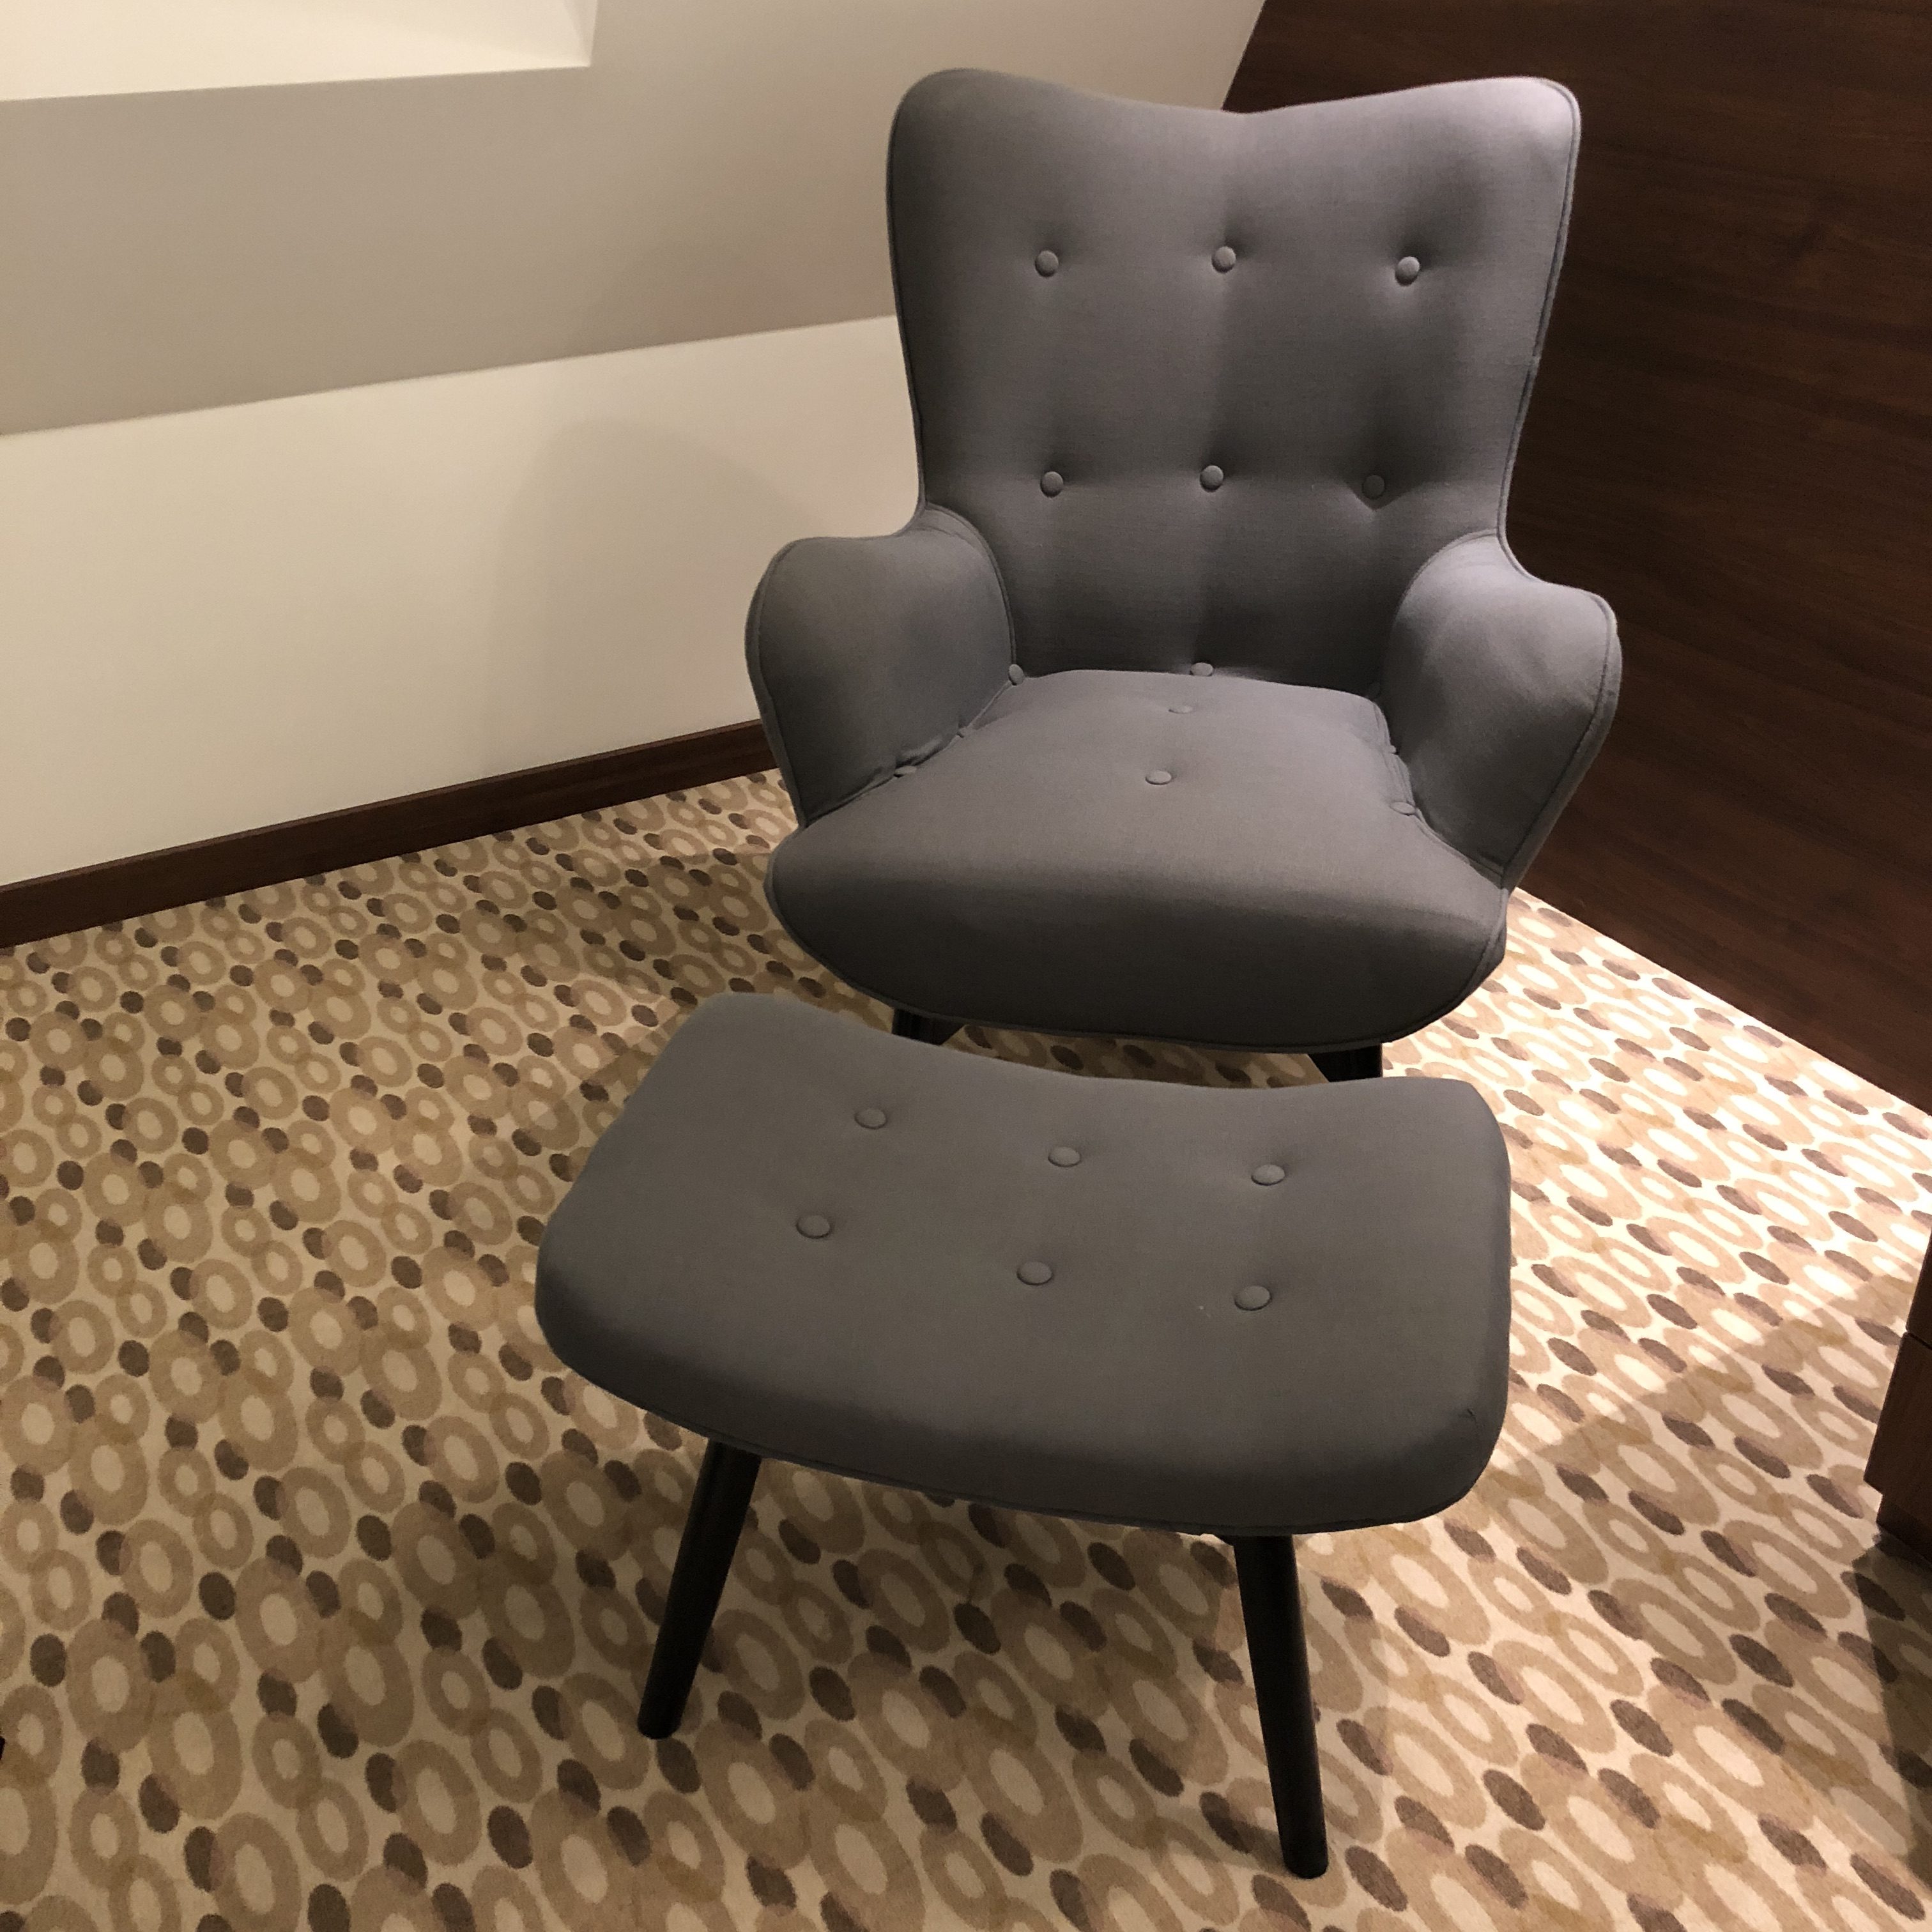 a grey chair and ottoman on a carpeted floor